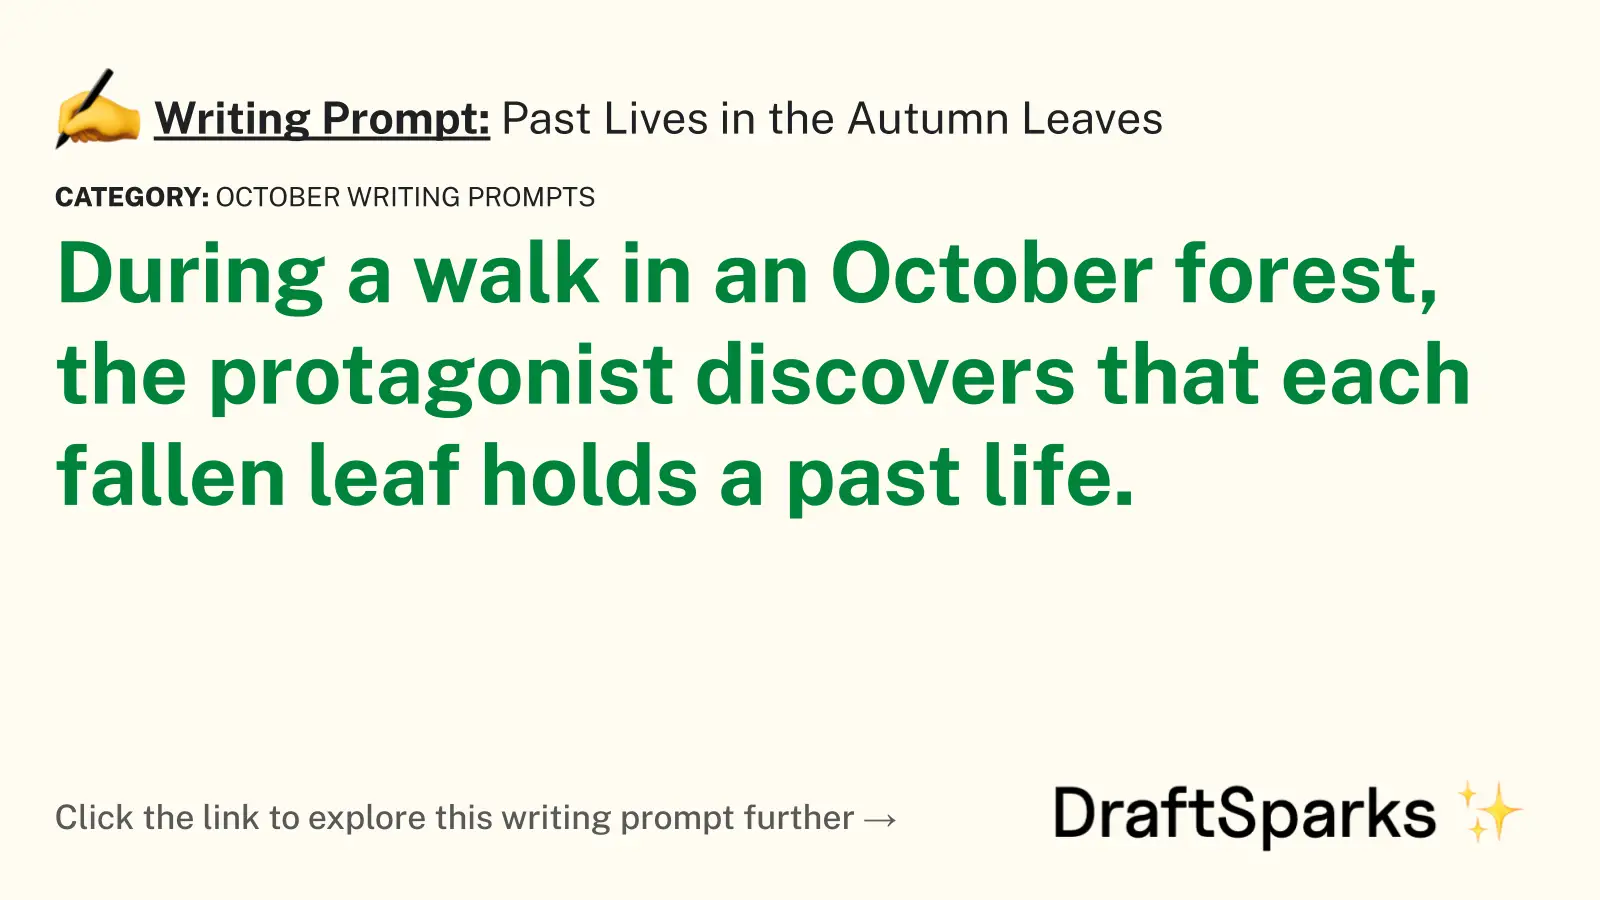 Past Lives in the Autumn Leaves